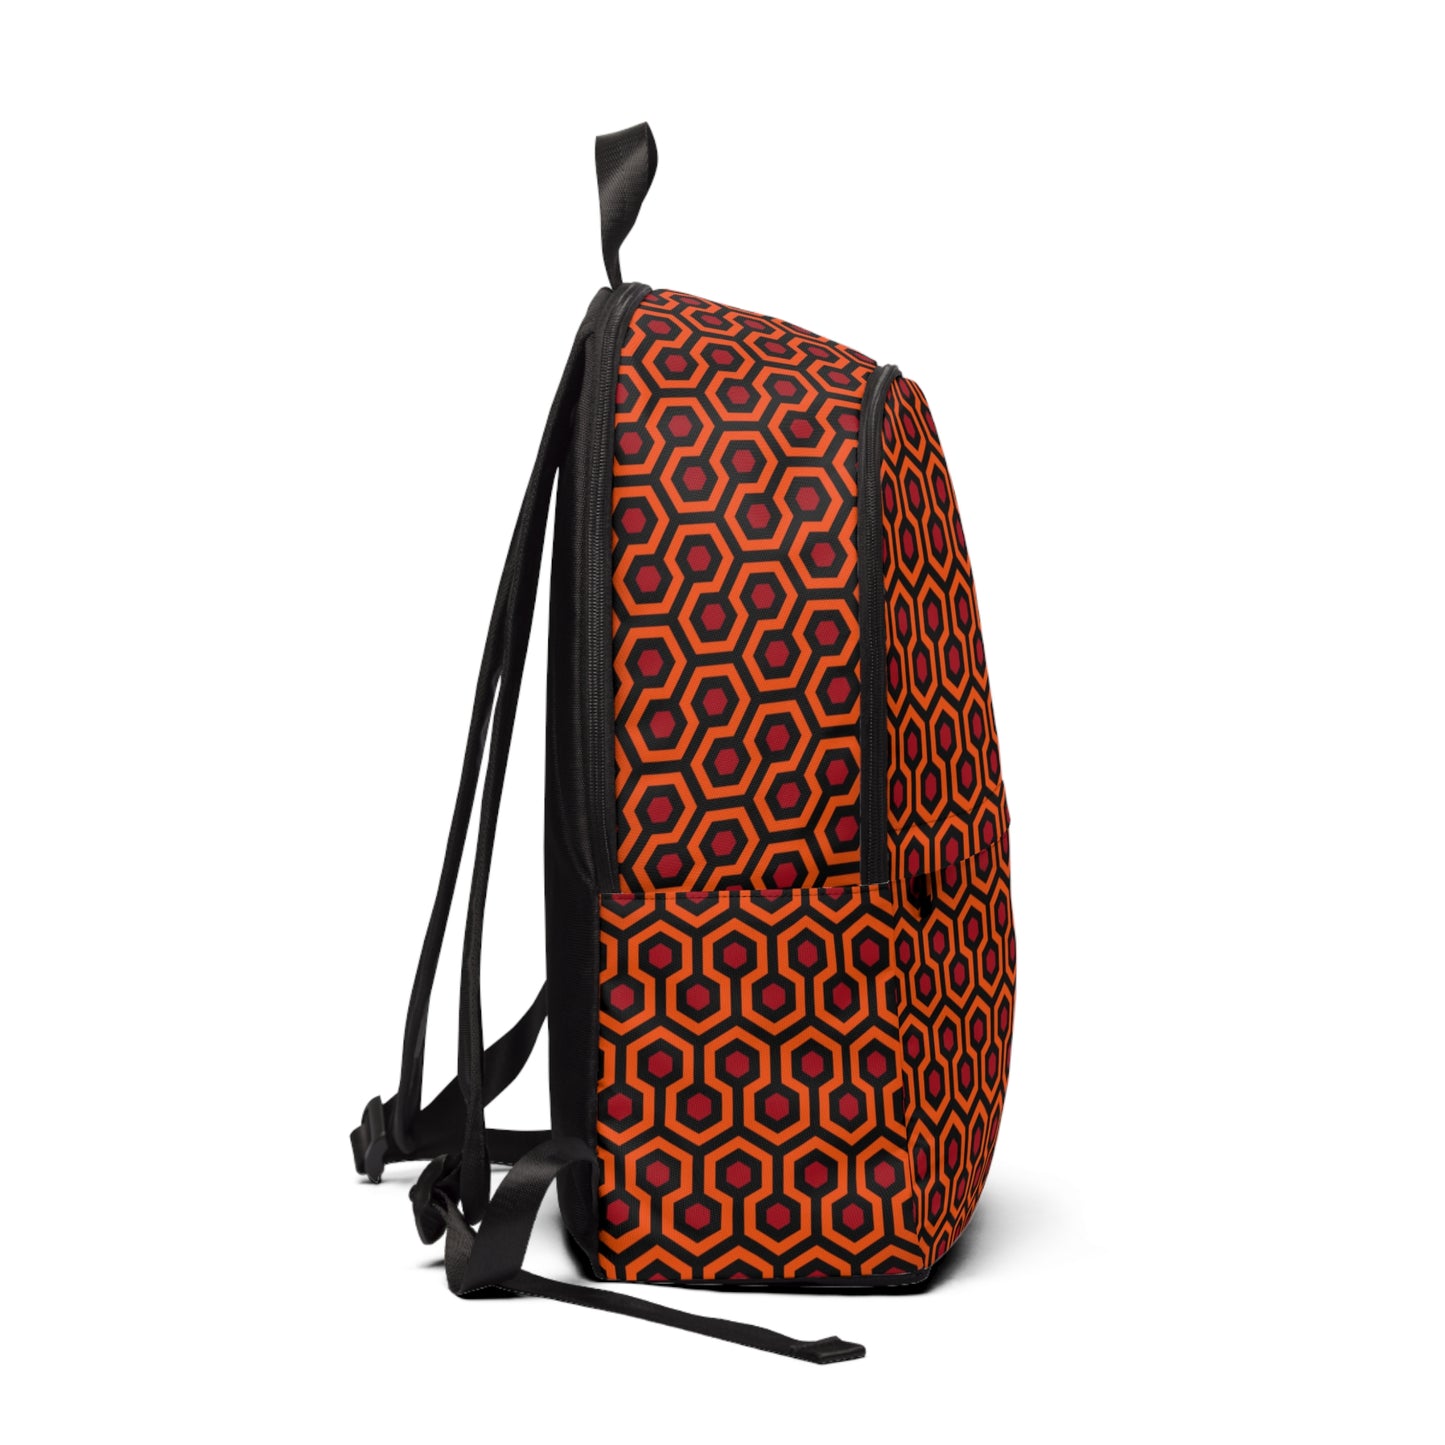 The Overlook Fabric Backpack